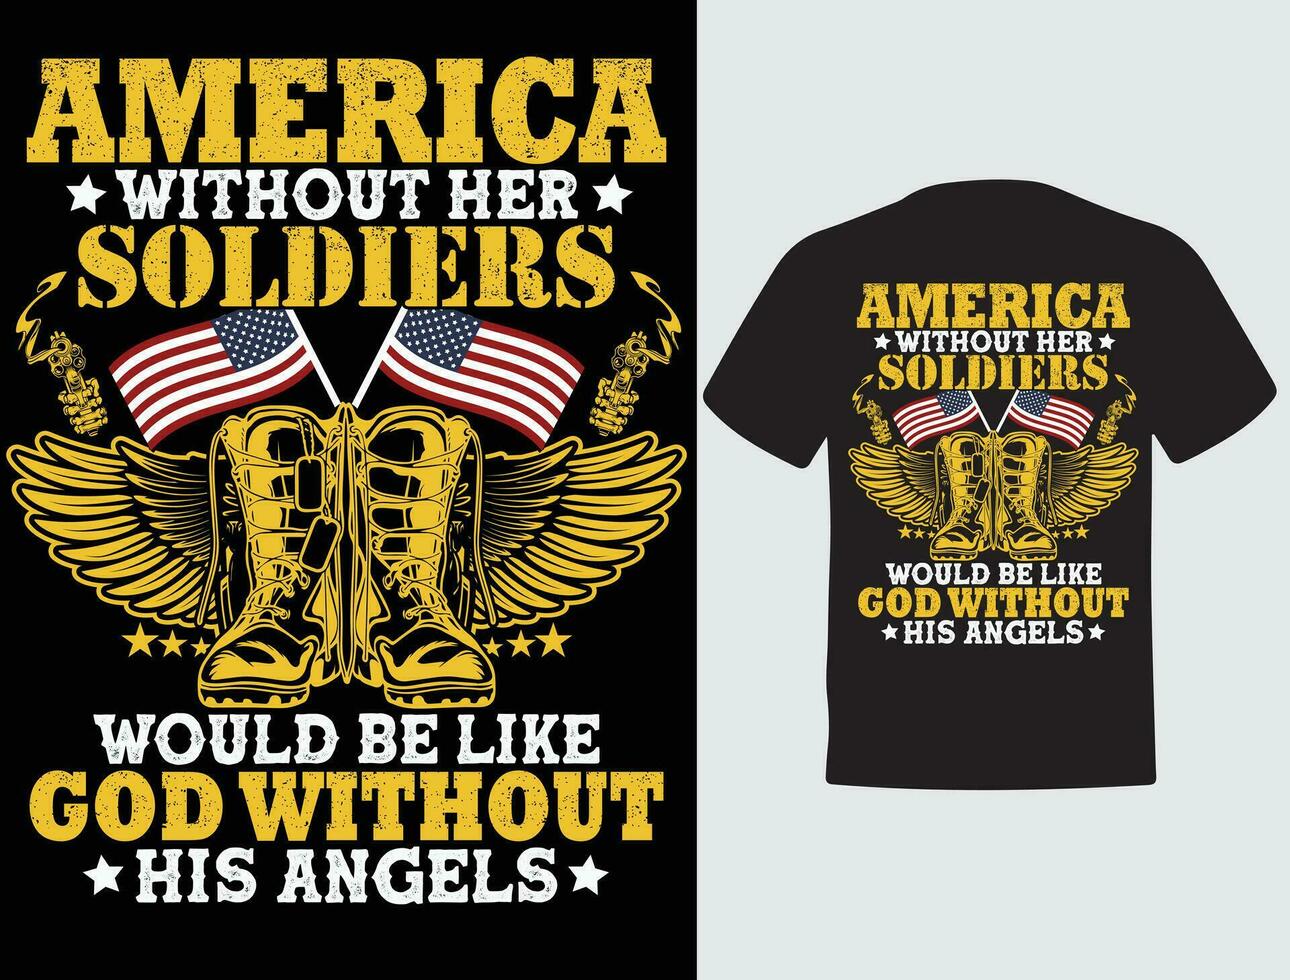 American veteran t-shirt design - America without her soldiers would be like god without his angels vector